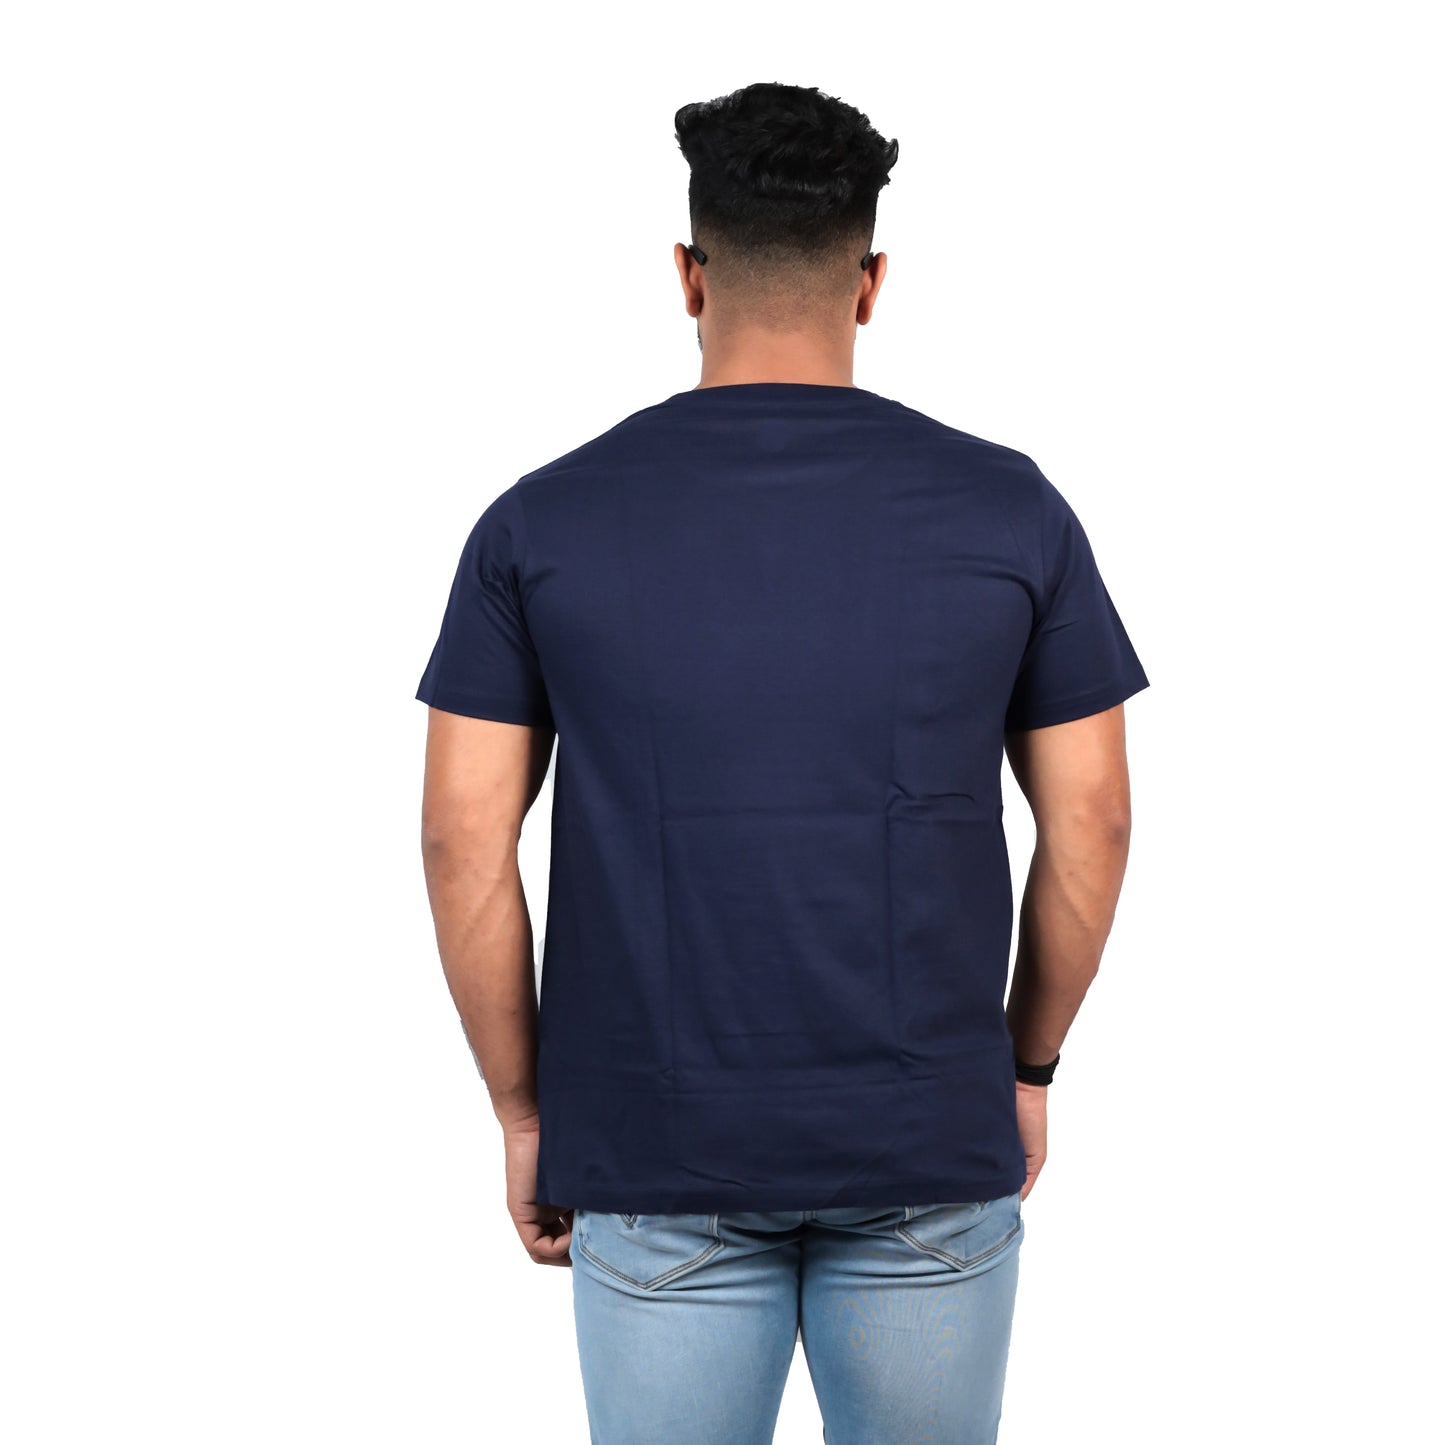 Couple Diving T-shirt In Navy Blue Color For Men